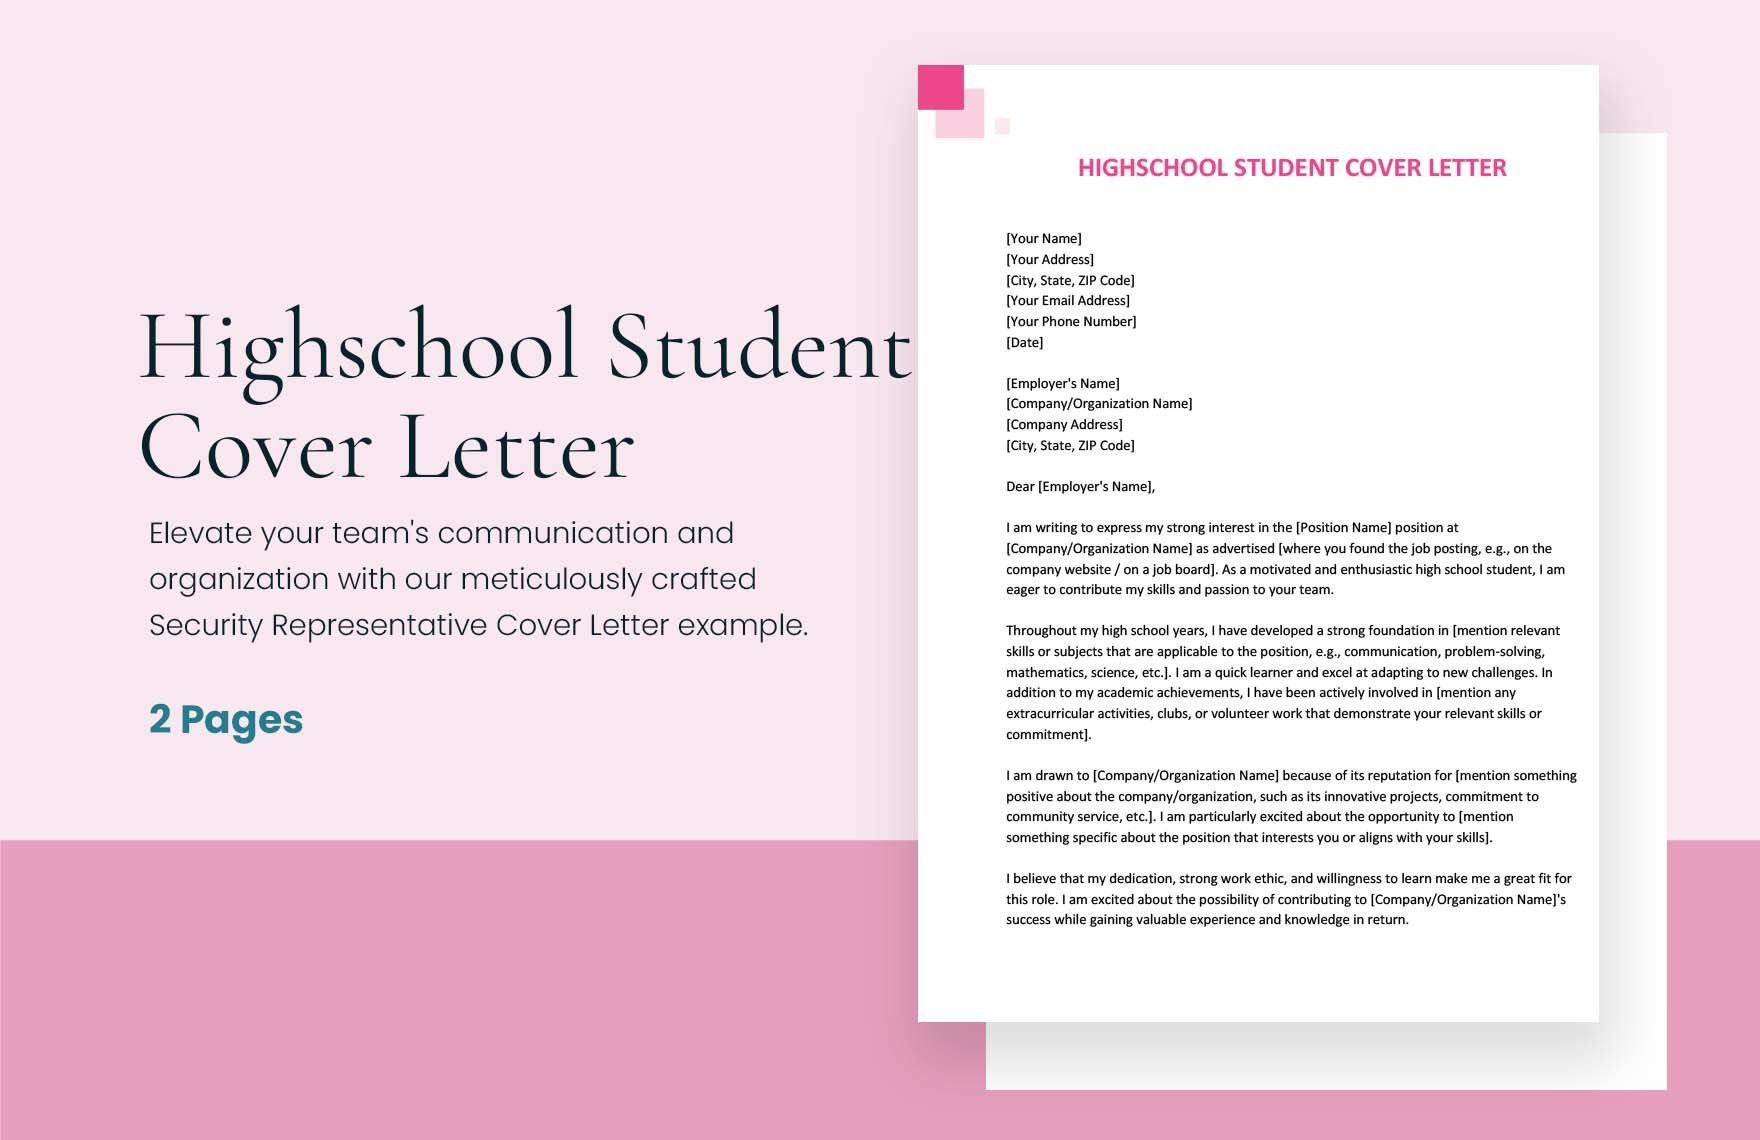 Highschool Student Cover Letter in Word, Google Docs